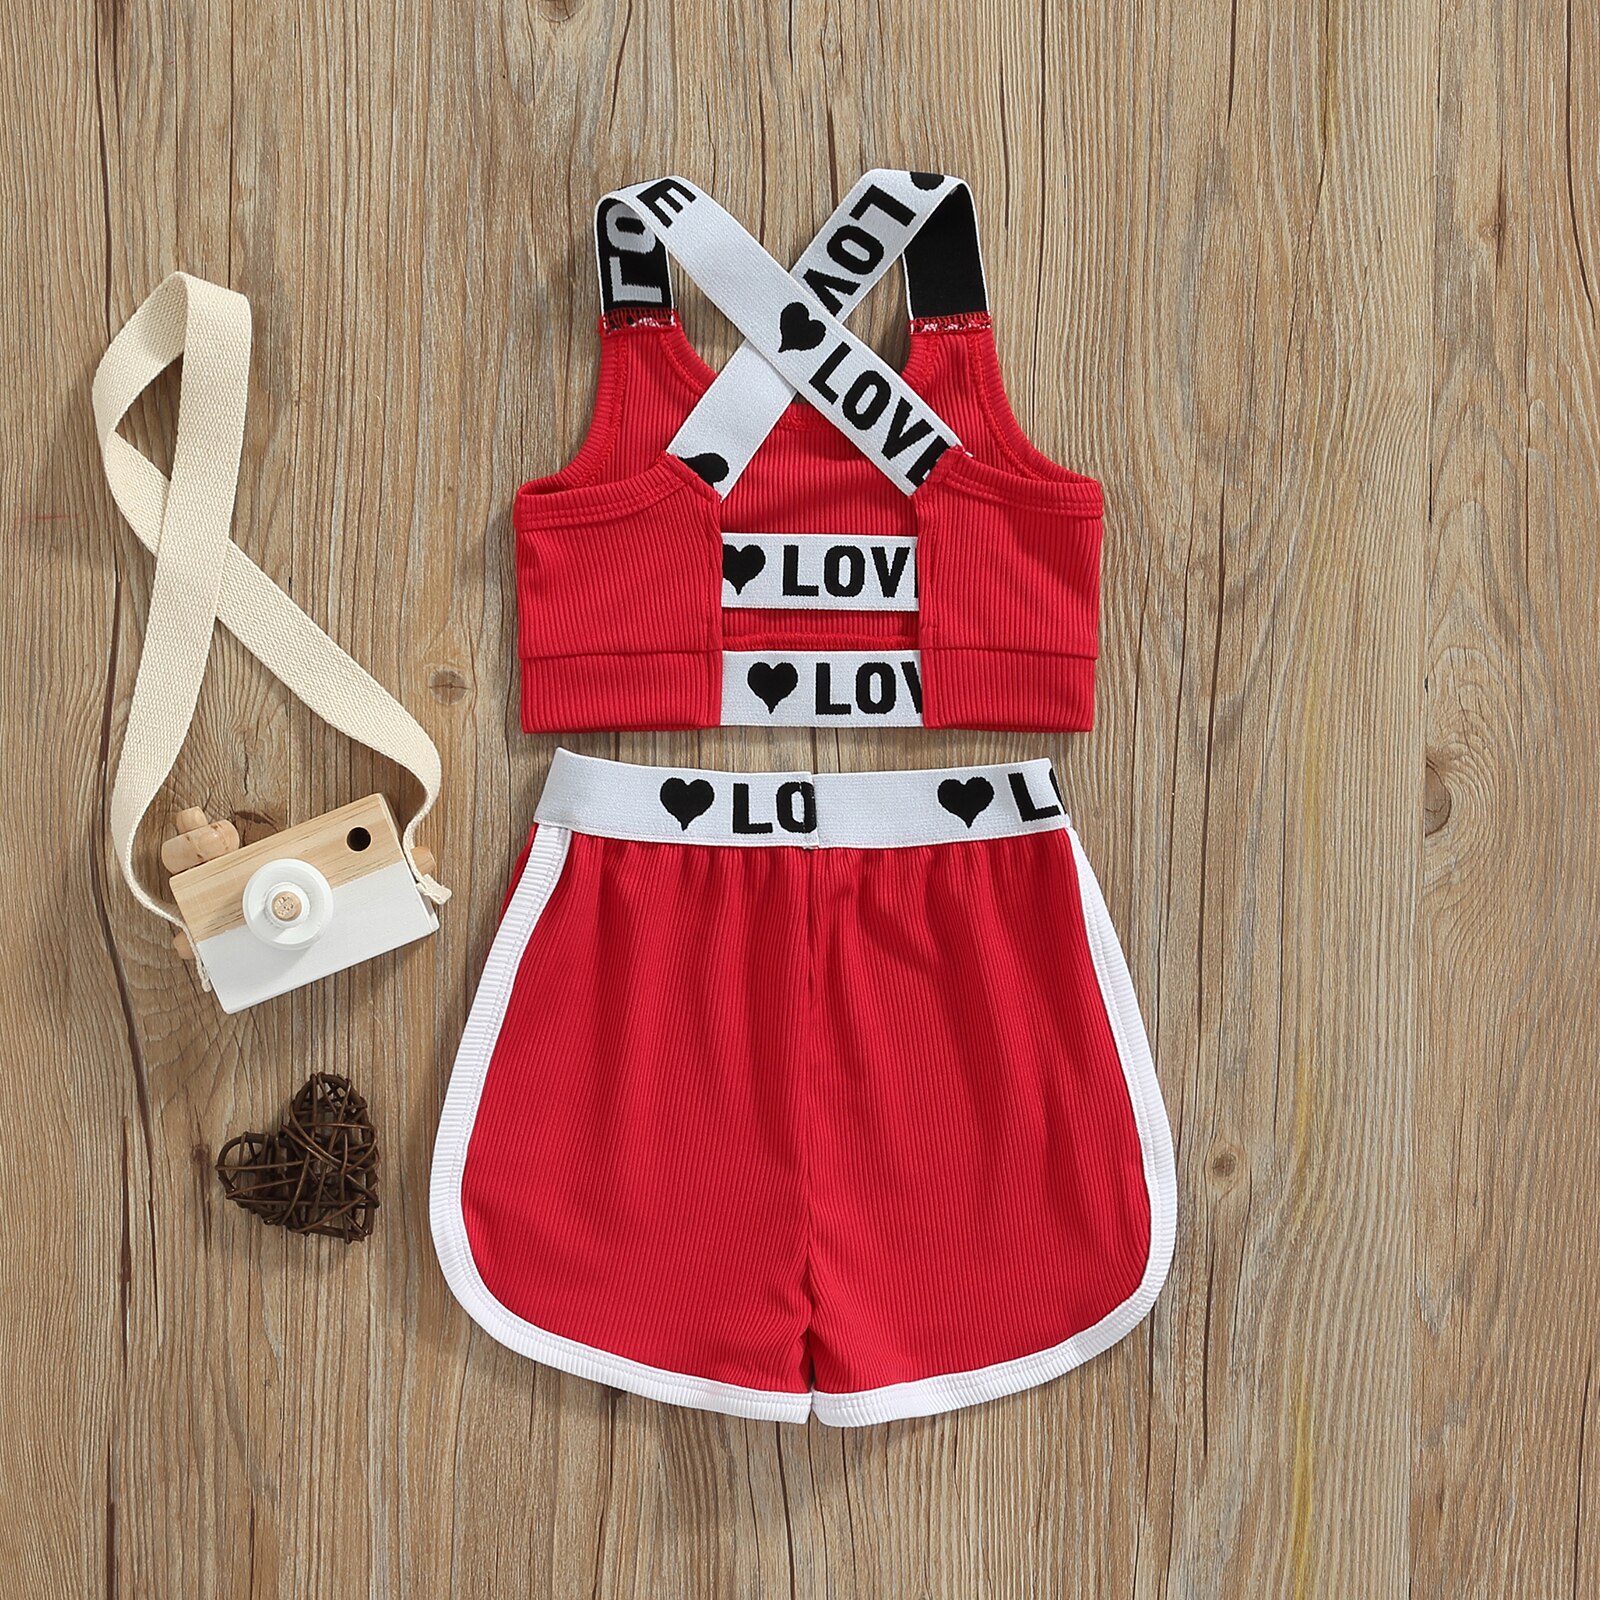 Fashion-Baby-Clothes-Set-Summer-Letter-Strap-Tank-Tops-Shorts-For-Girls-Set-Toddlers-2-Pieces-5